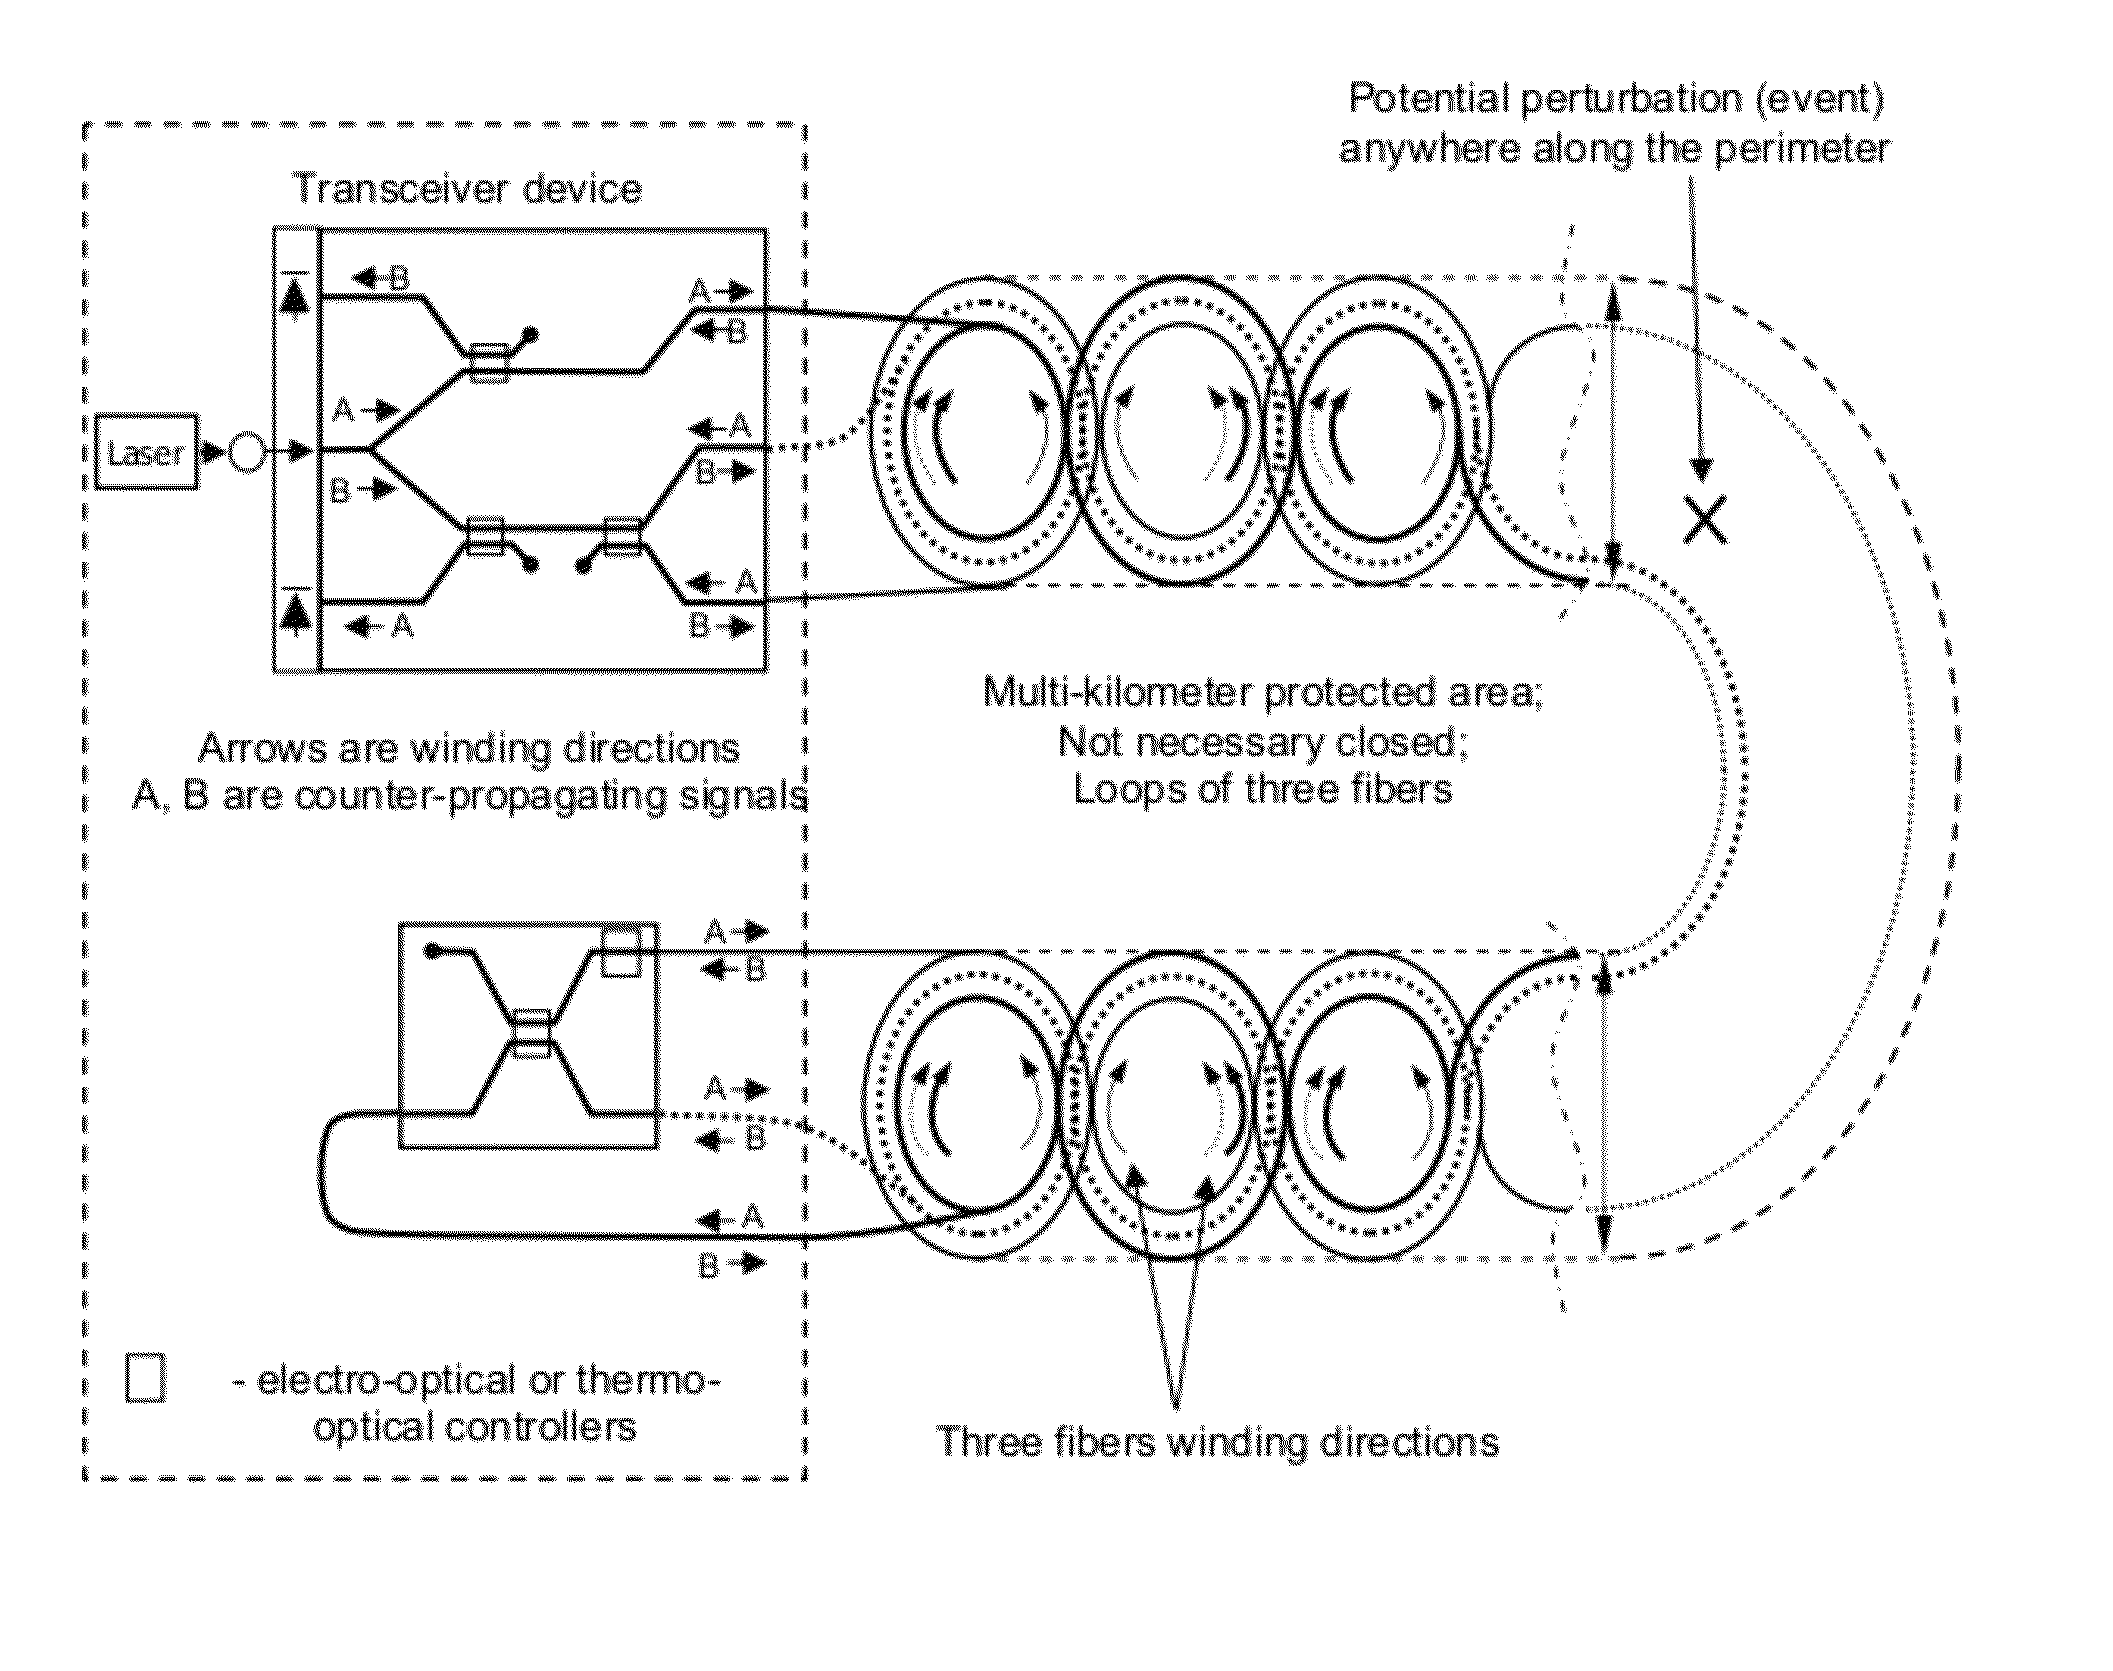 Optical sensor for detecting and localizing events